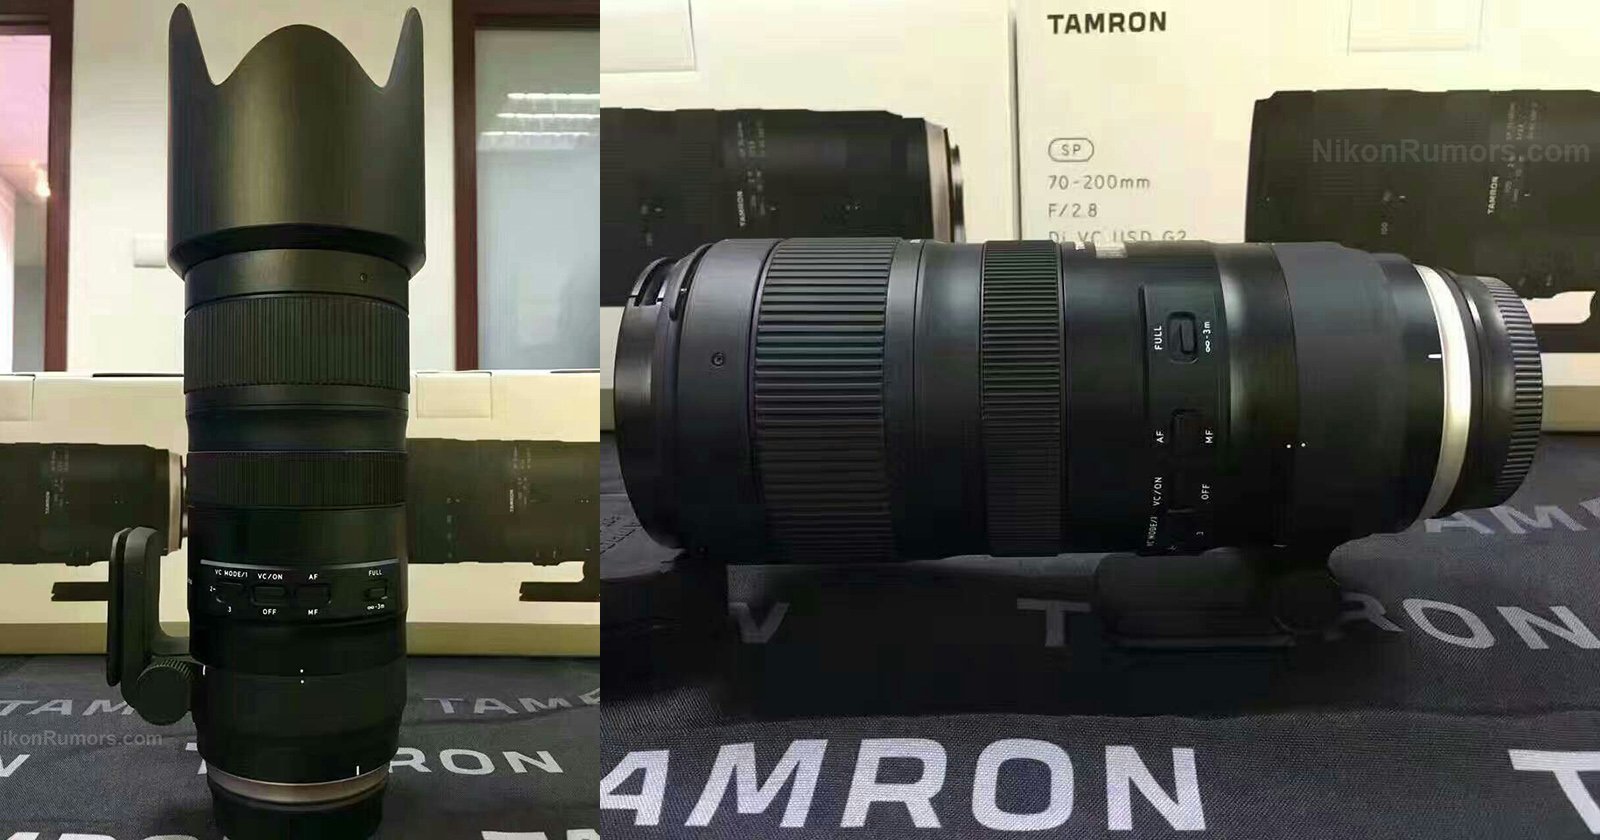 First Photos of New Tamron 70-200mm f/2.8 Lens Leaked